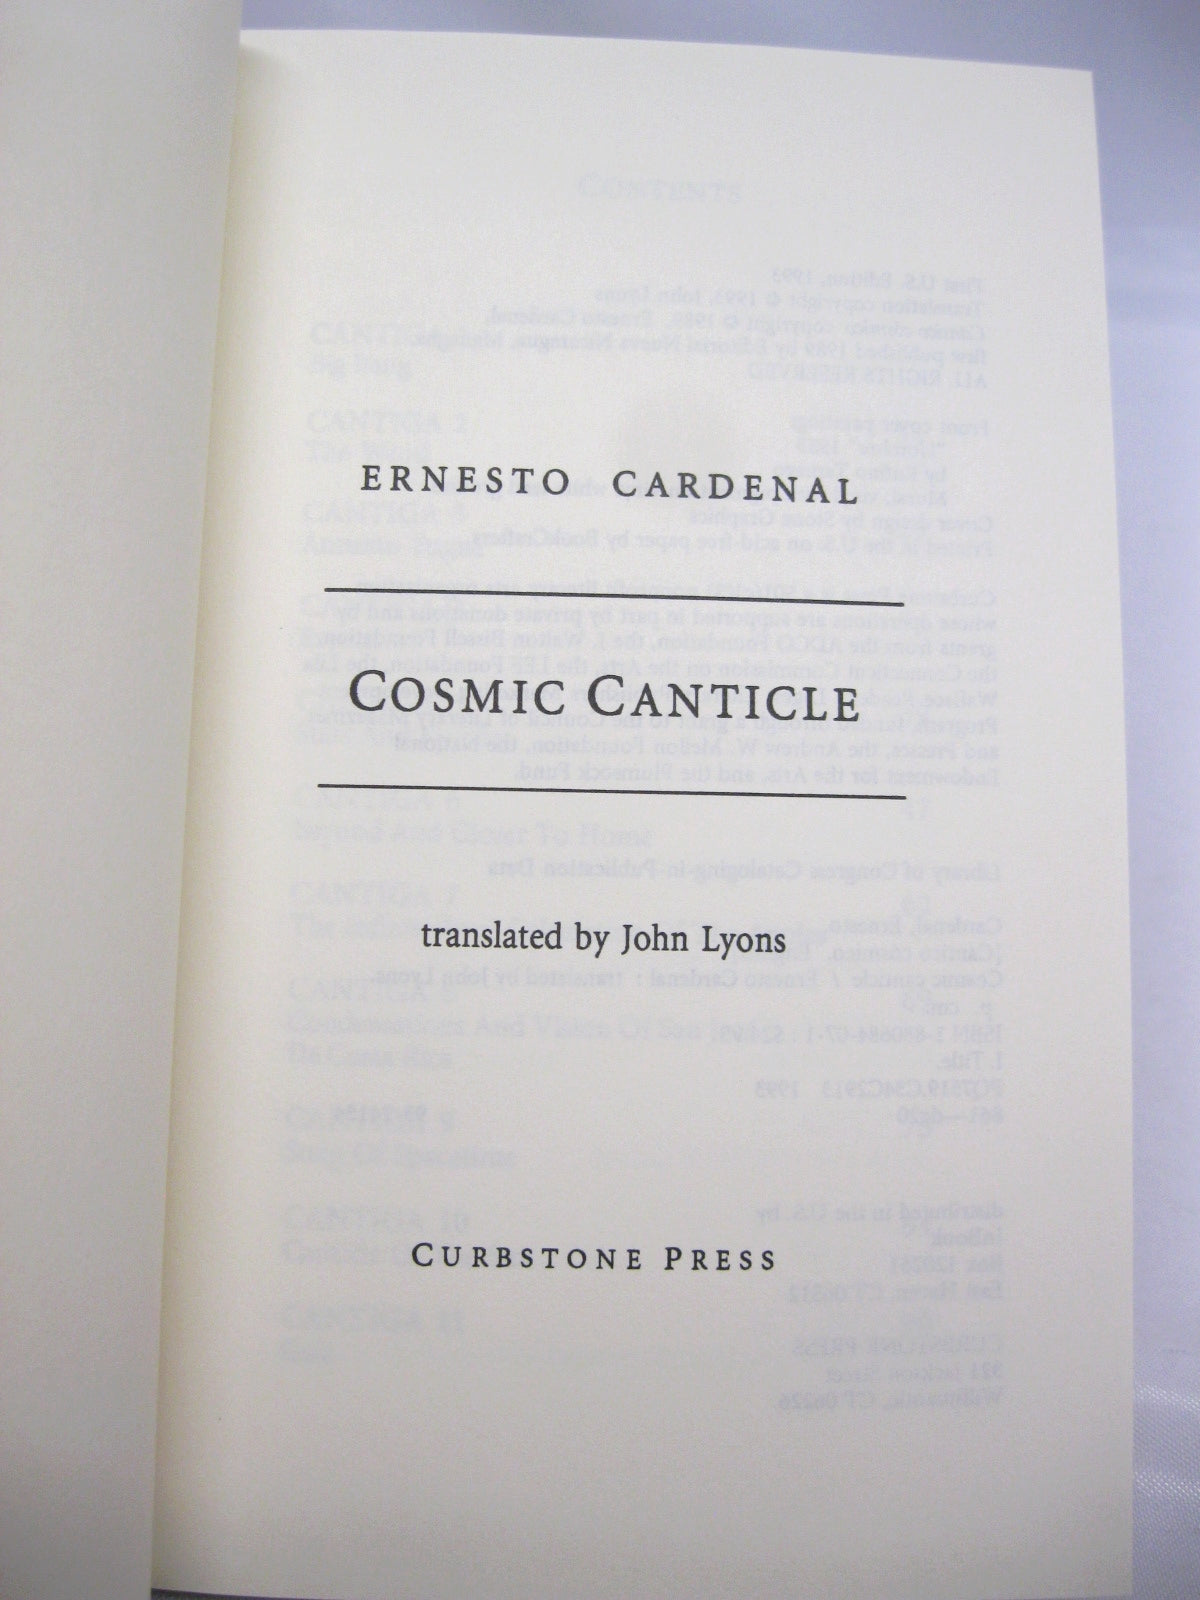 Cosmic Canticle by Ernesto Cardenal